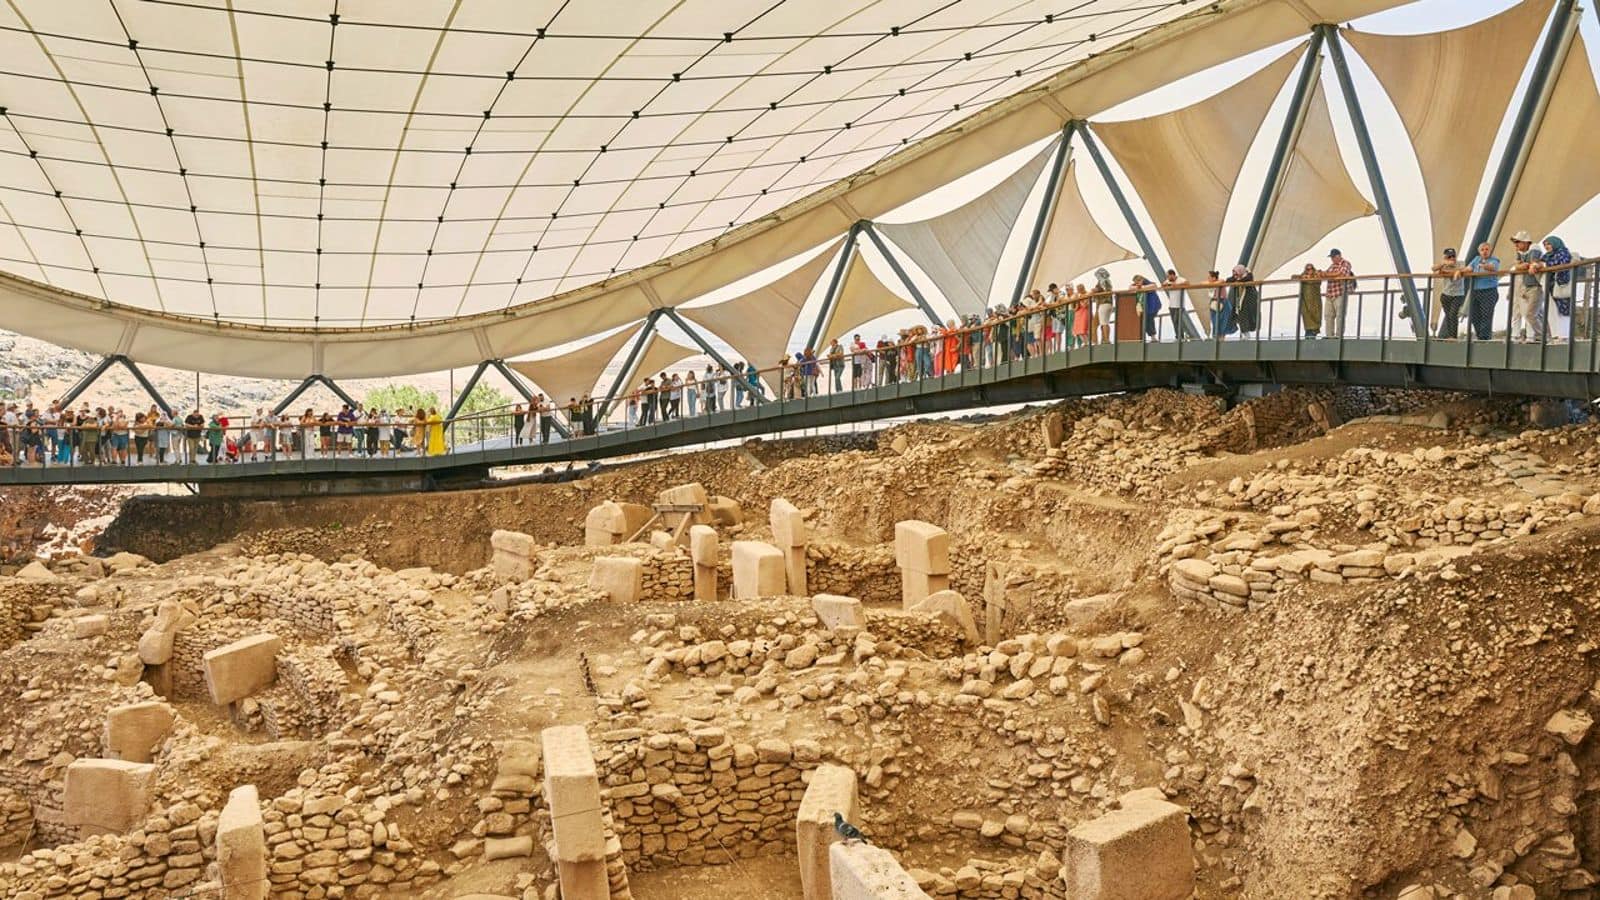 Gobekli Tepe in Turkey is a fascinating archeological site